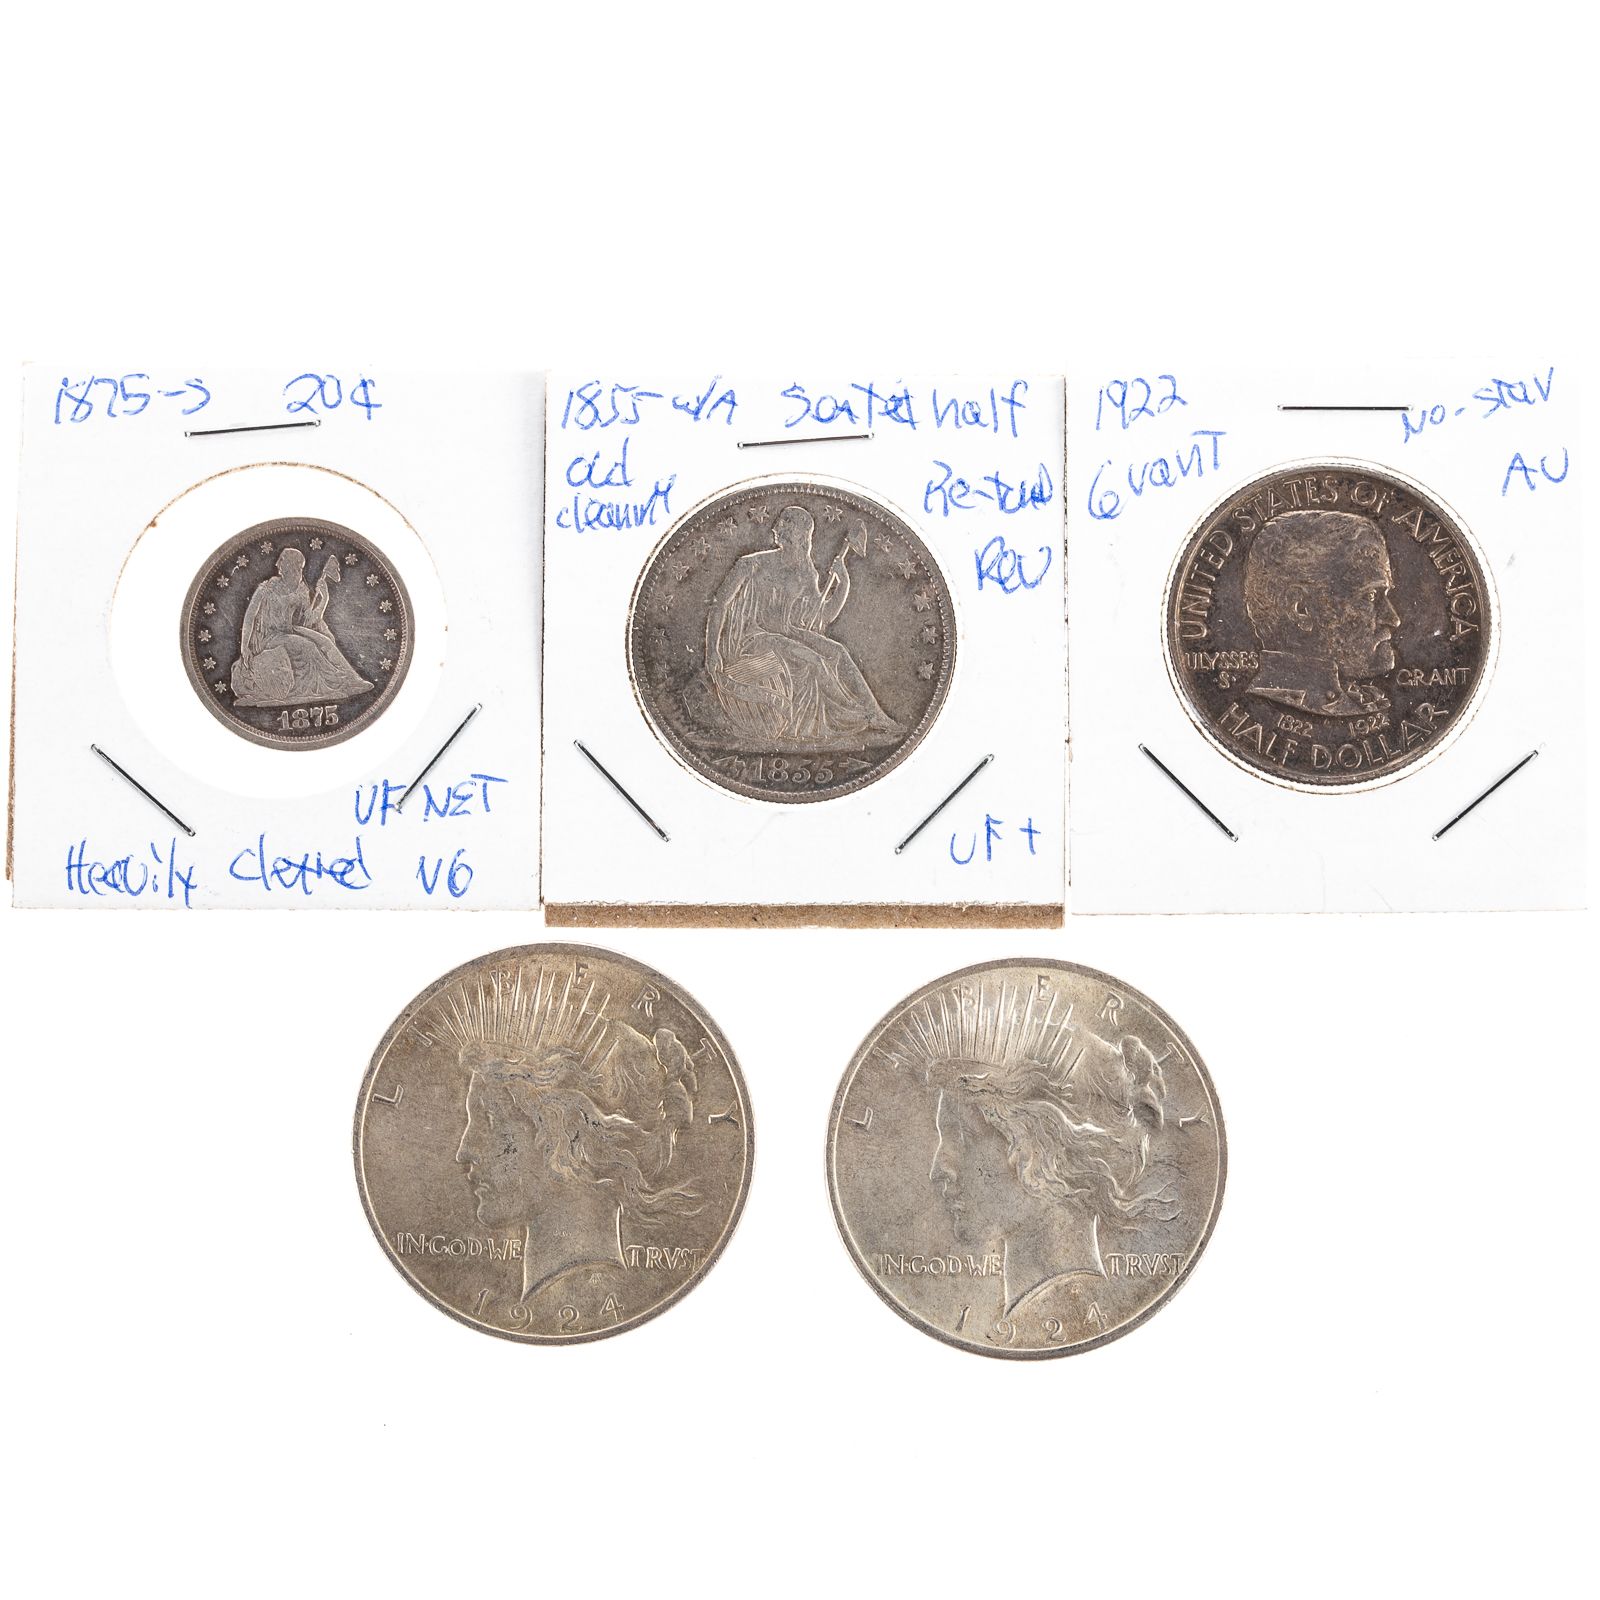 THREE BETTER COINS TWO 1924 AU 334198